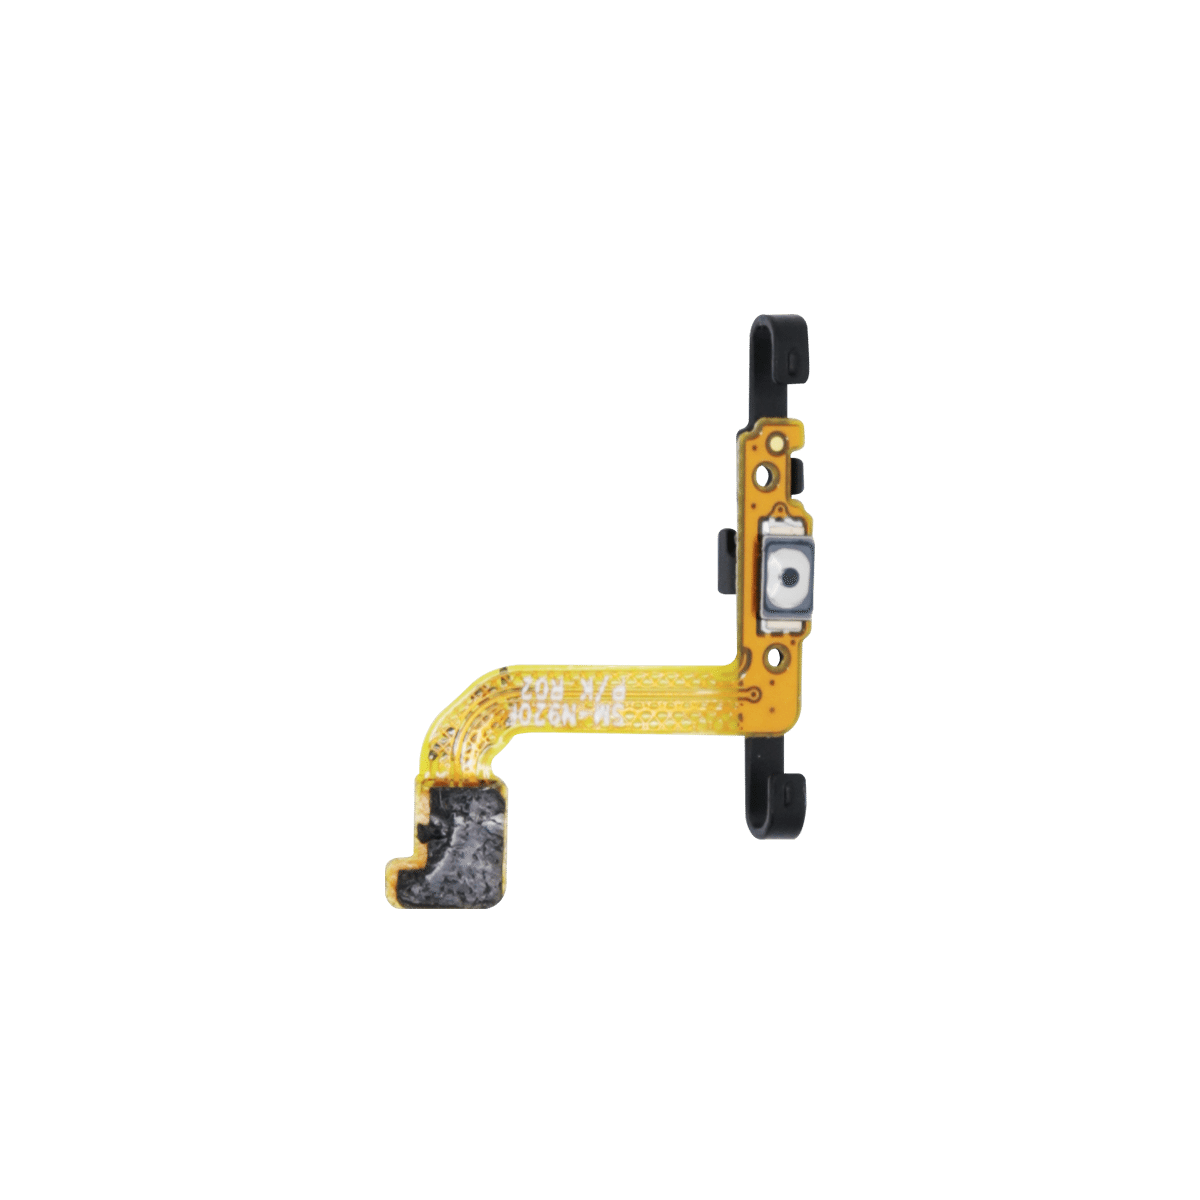 Samsung Galaxy Note 5 Power Button Flex Cable Replacement